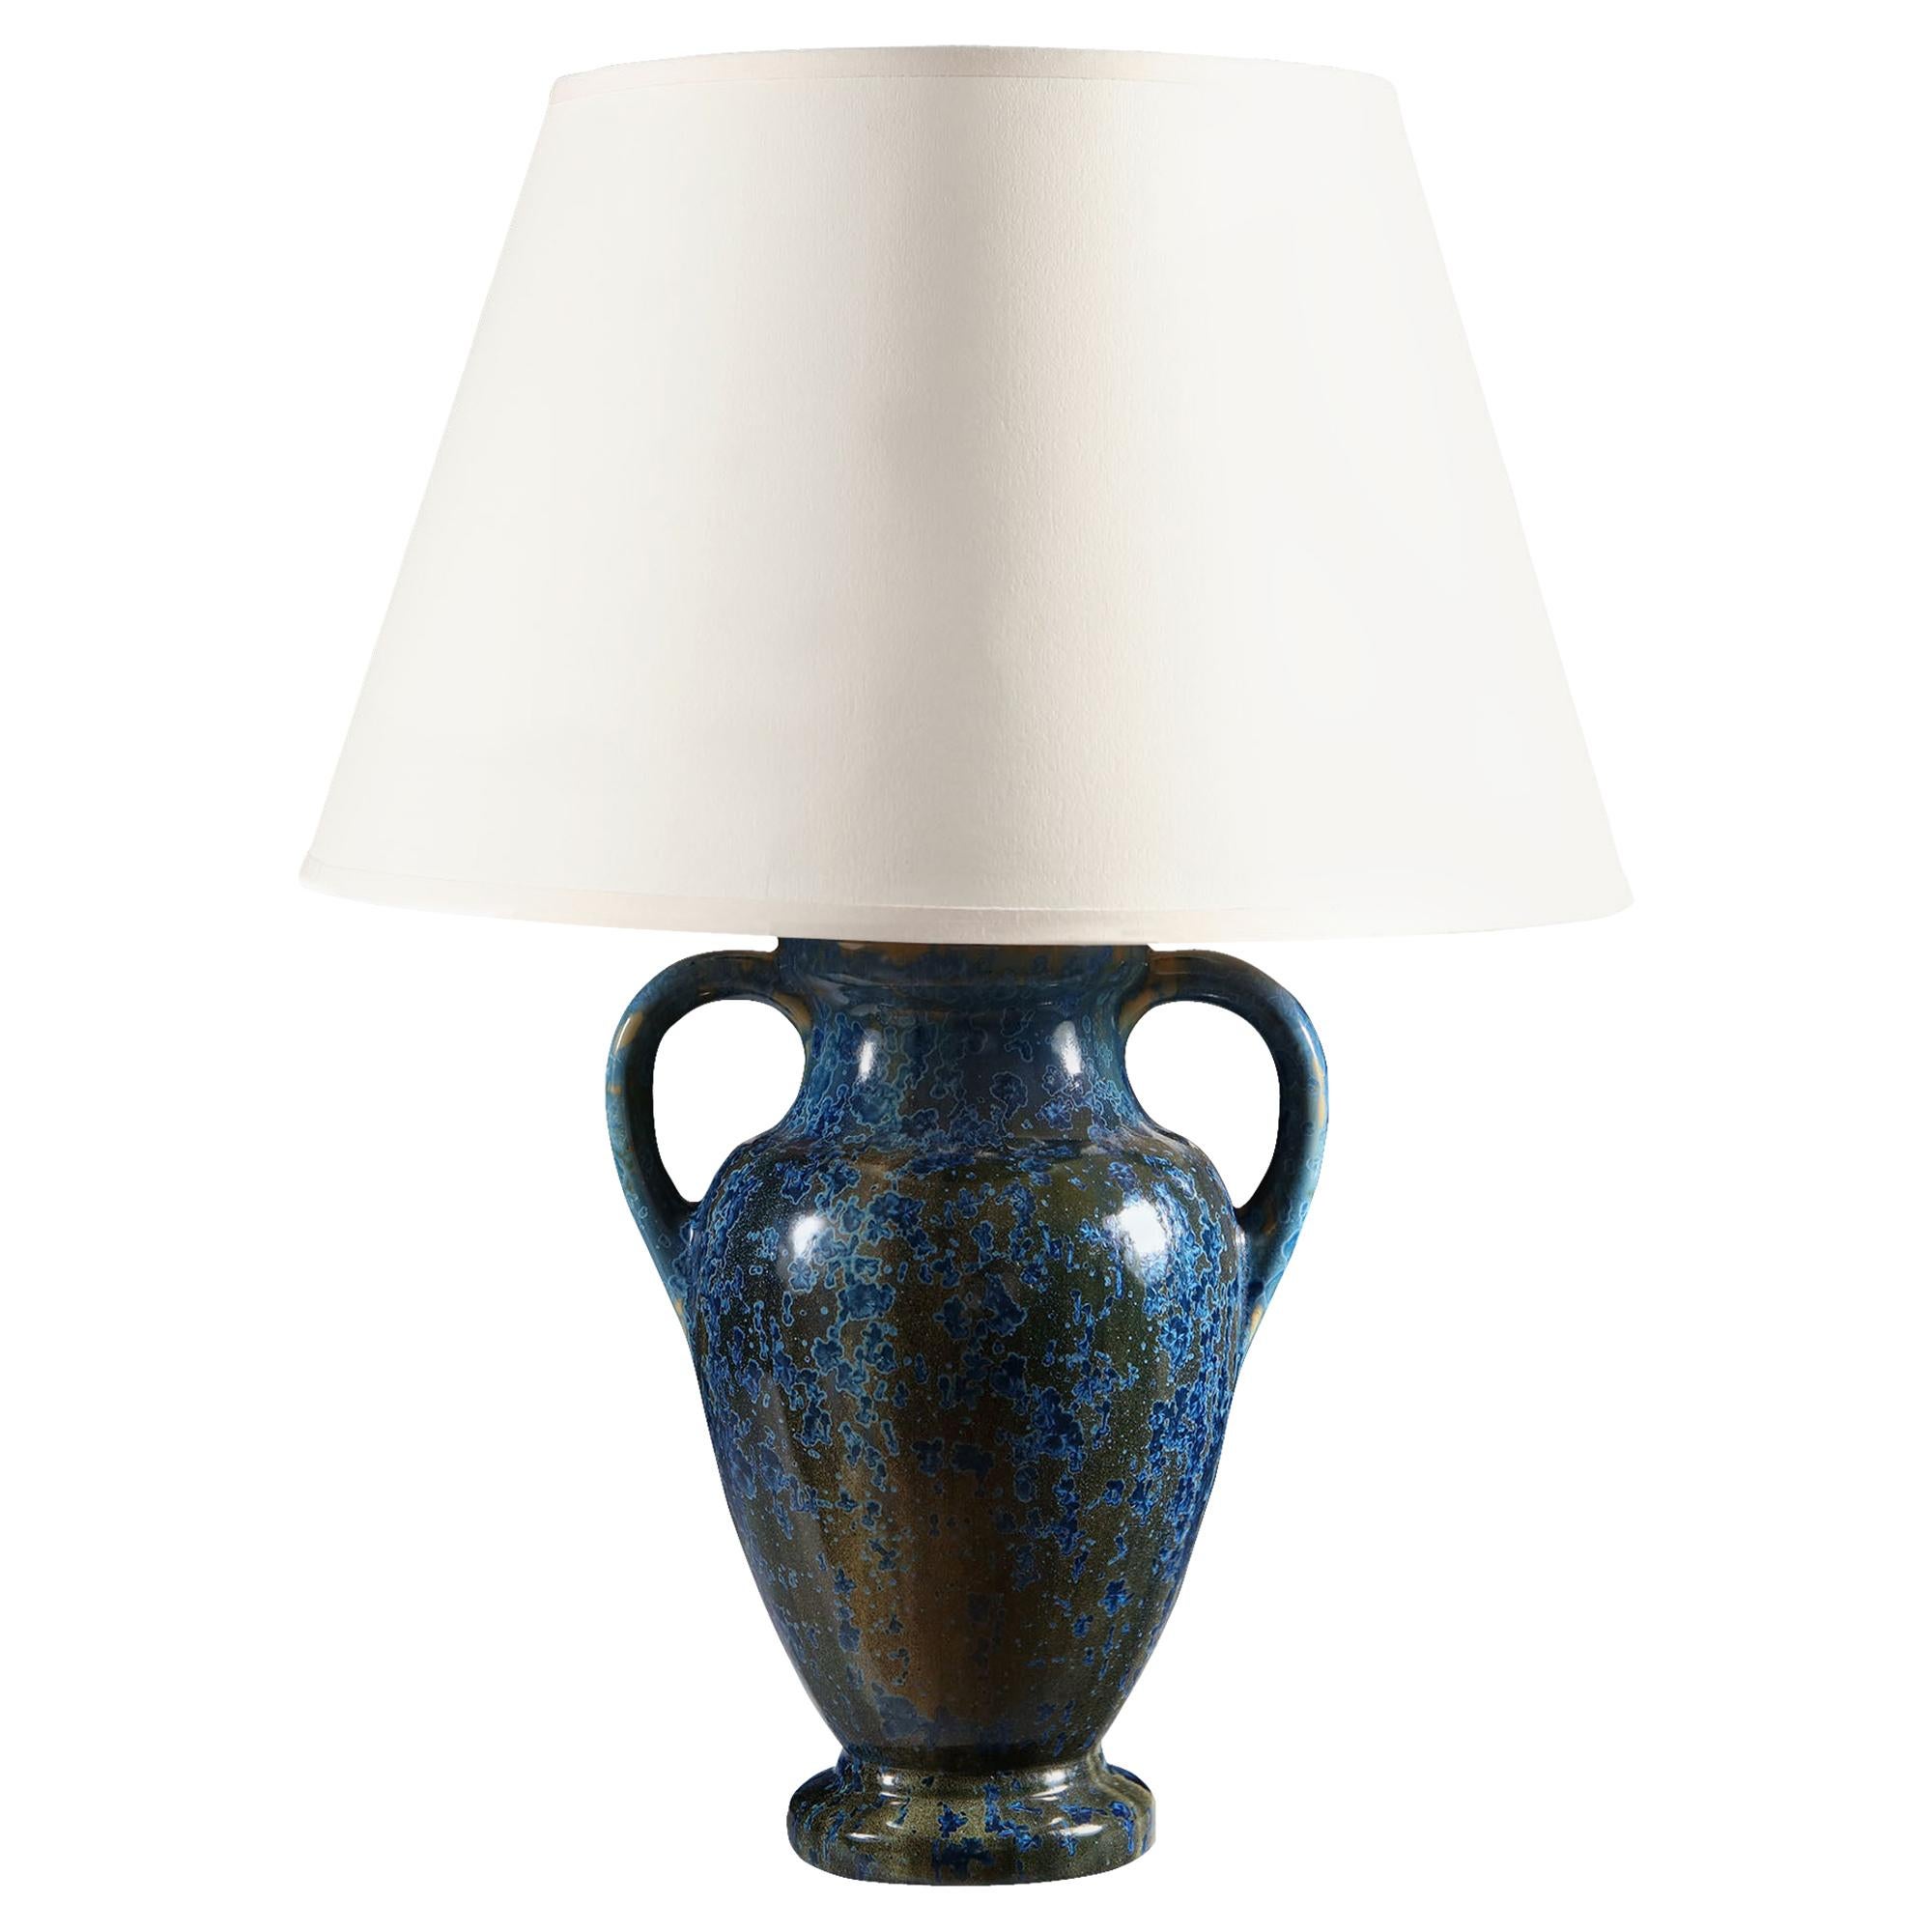 Pierrefonds Pottery Vase with Blue Crystalline Glaze, Mounted as a Lamp